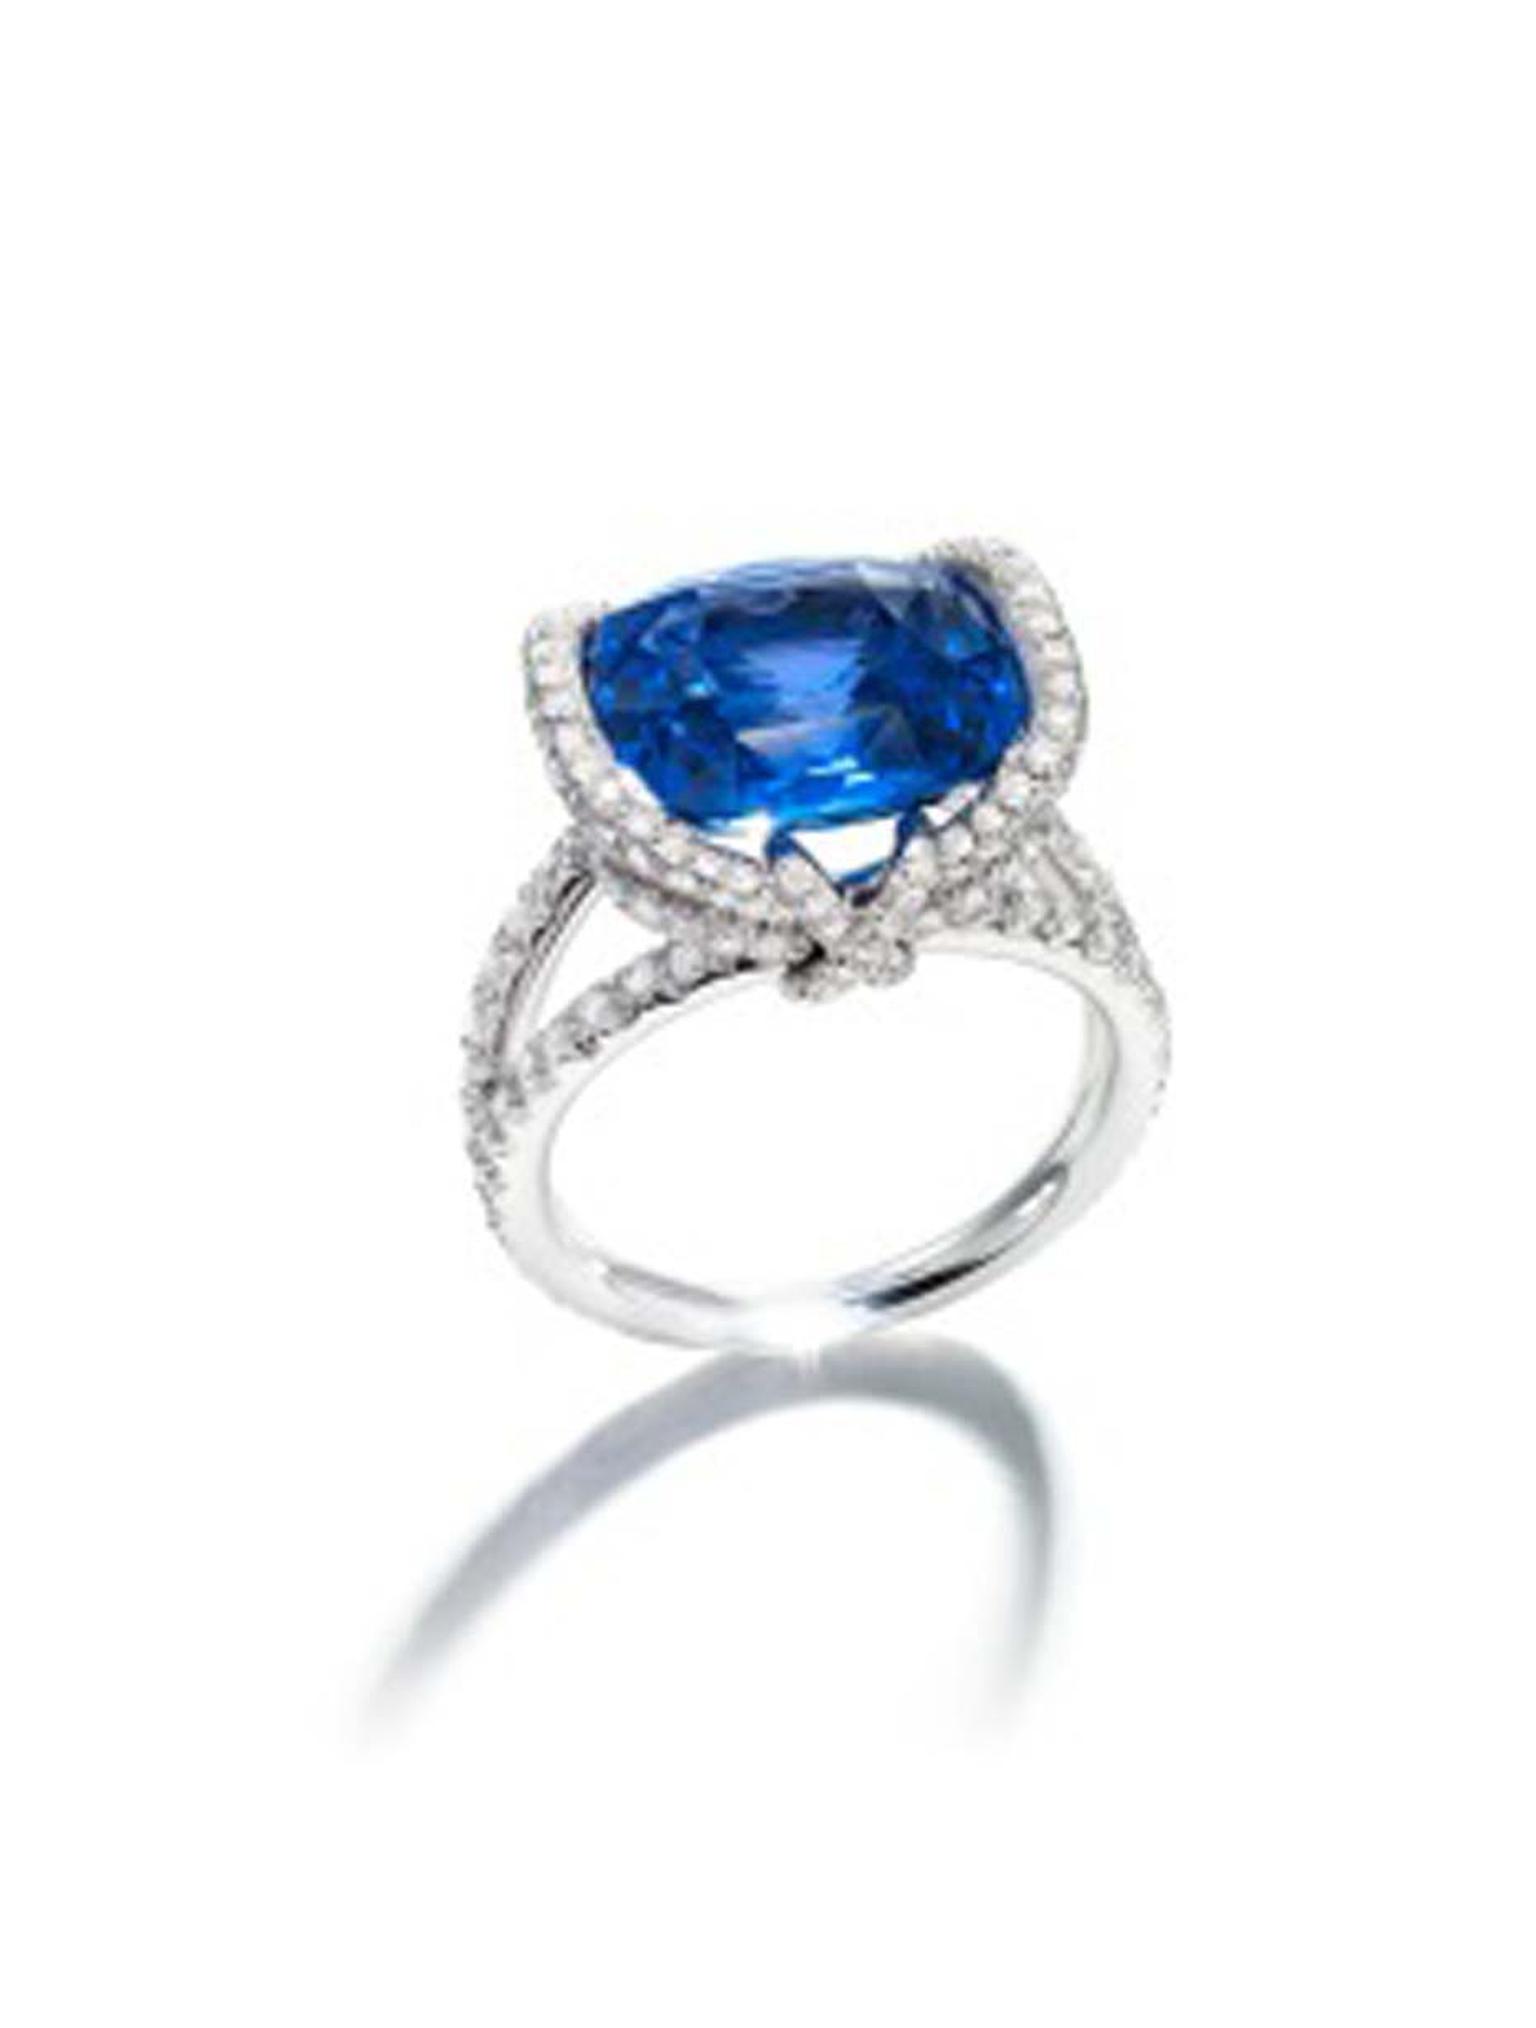 Chaumet Liens ring with a centre sapphire surrounded by diamonds.